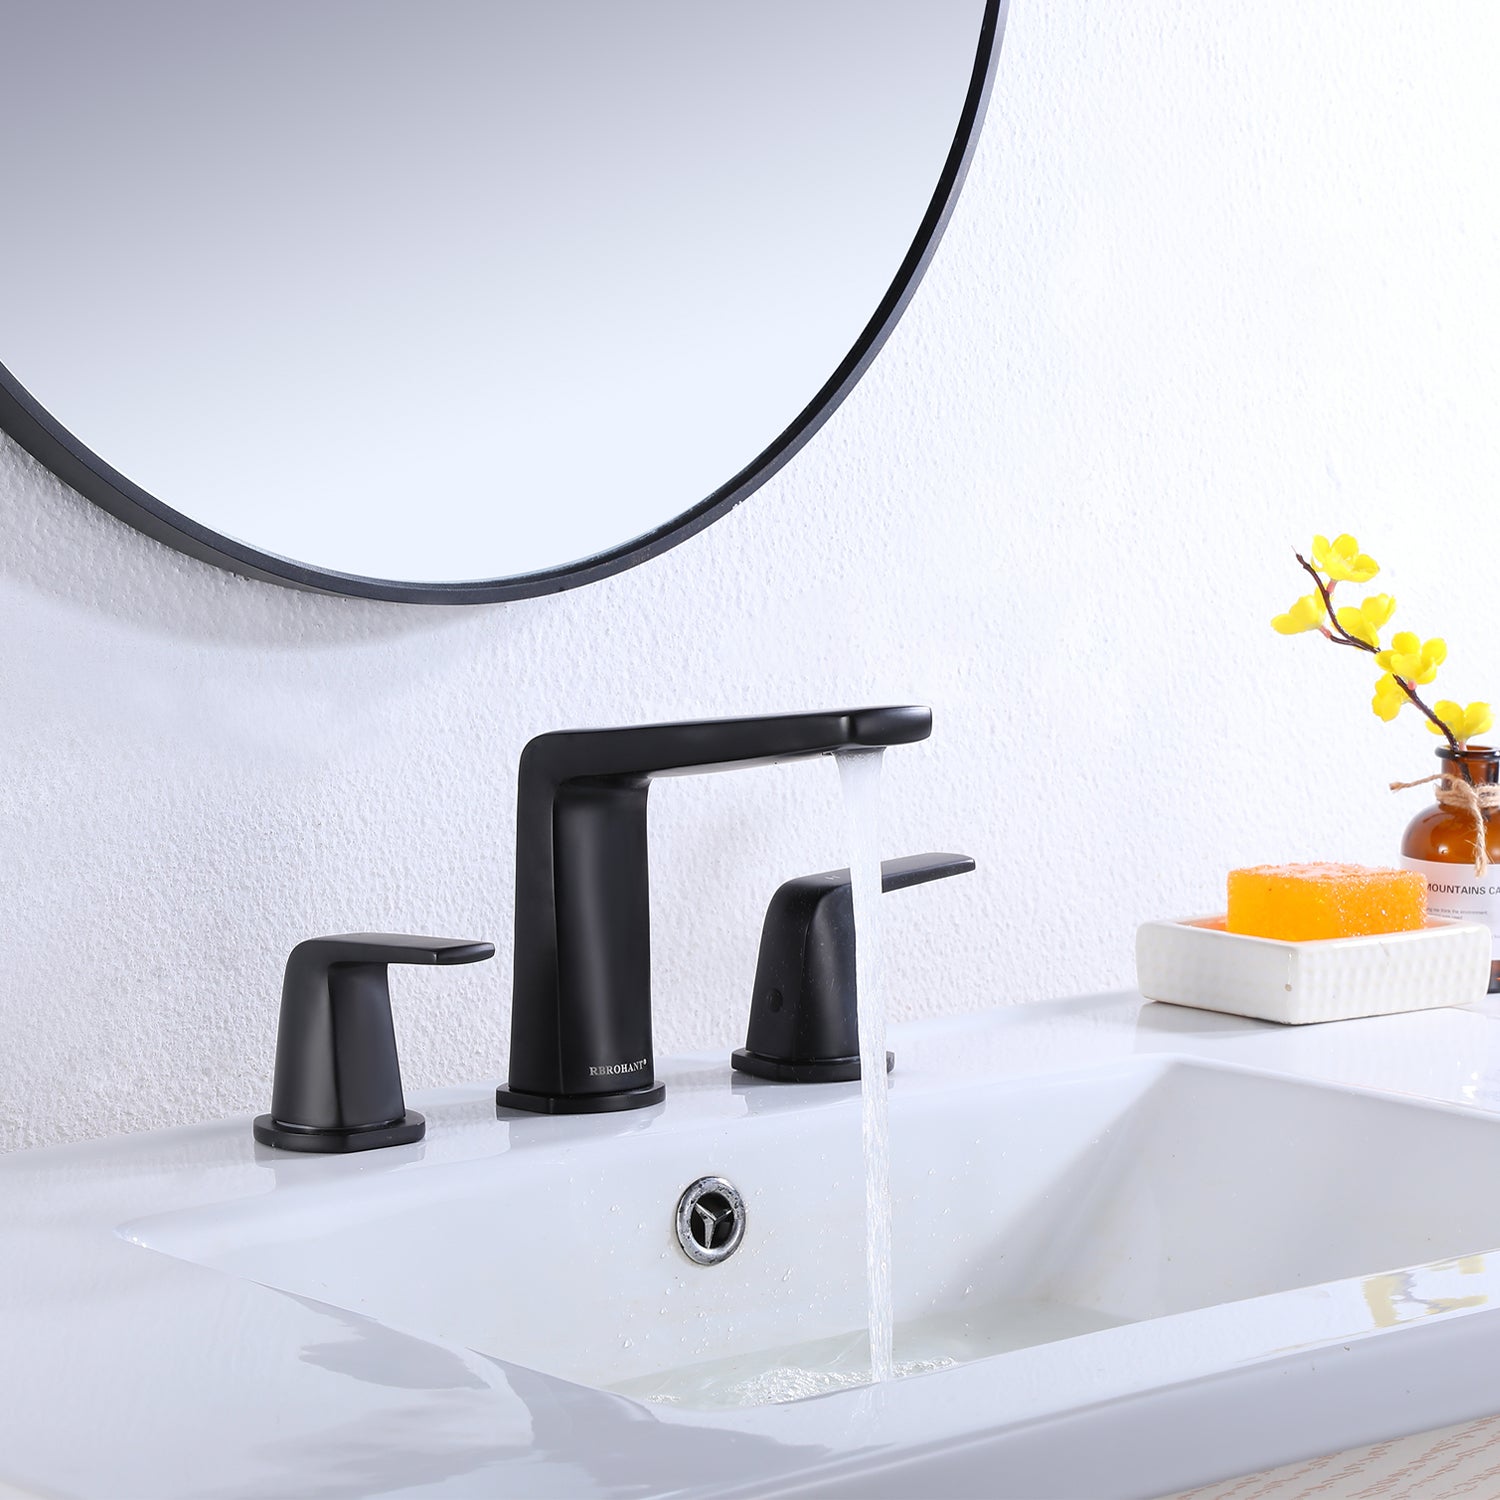 TIPS FOR CHOOSING THE RIGHT BATHROOM FAUCETS